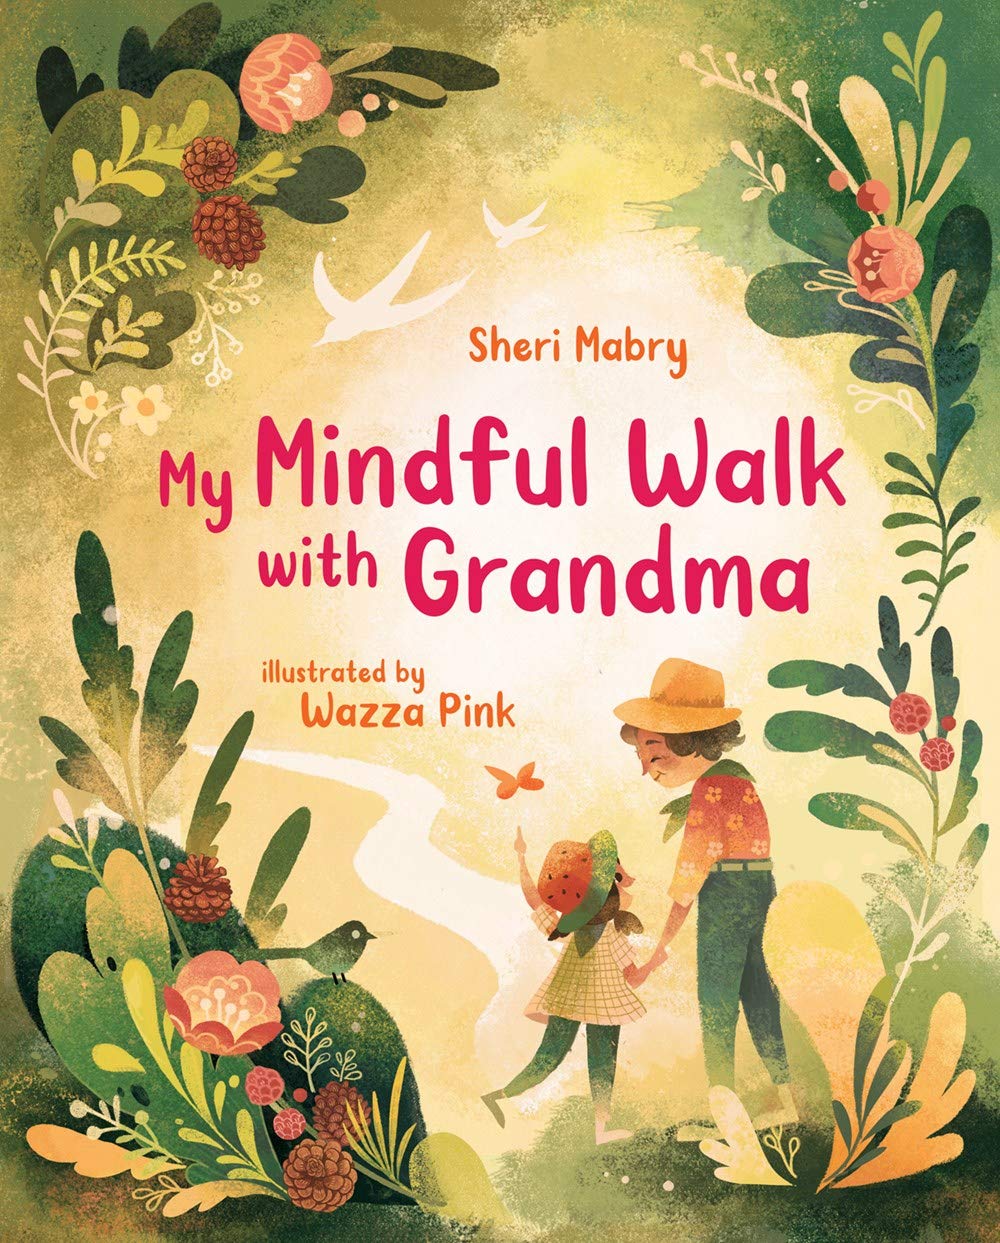 The cover of the picture book "My Mindful Walk With Grandma" features a grandmother and her young granddaughter walking through the forest hand in hand. The girl points at a butterfly while the grandma smiles at her. The border around the scene is made of leaves, flowers, berries, and birds.